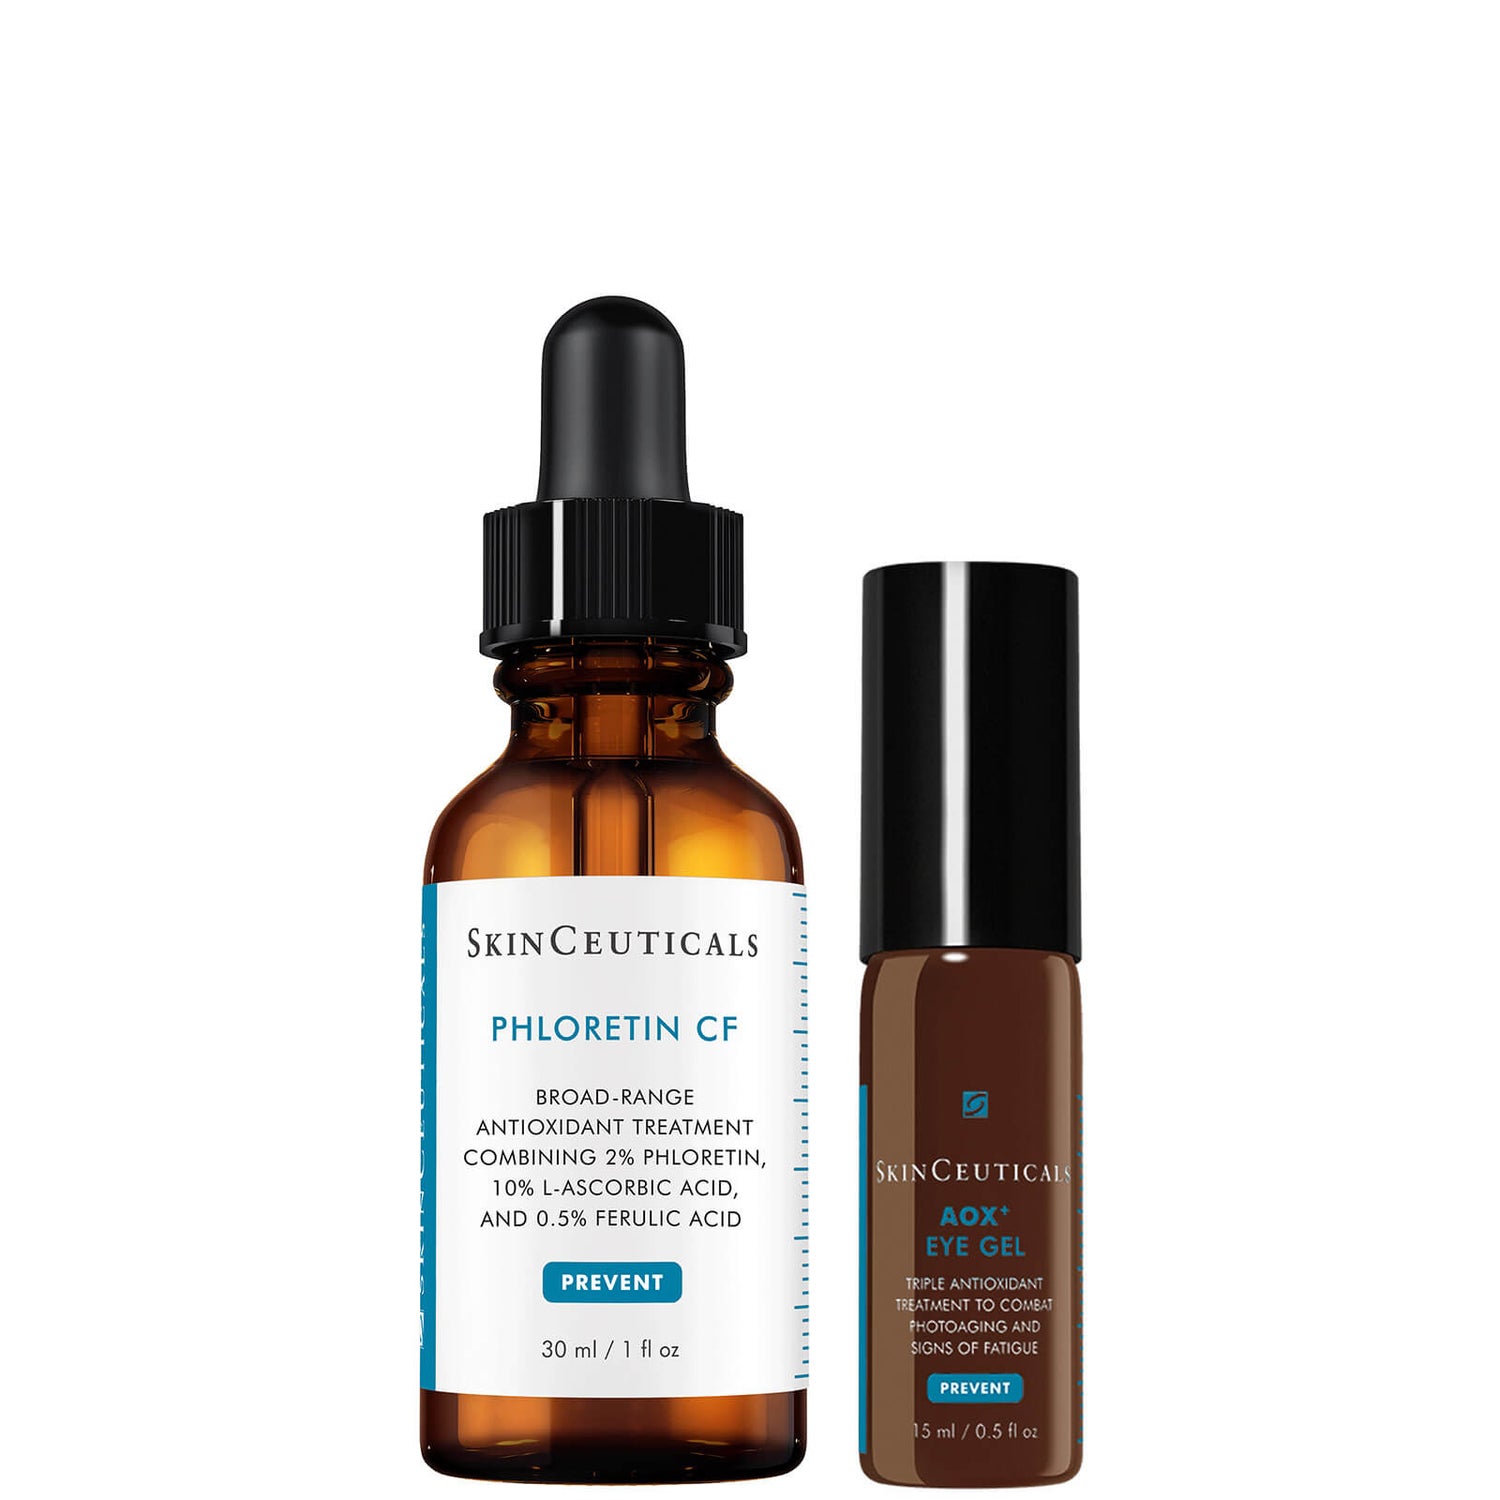 SkinCeuticals Vitamin C Face & Eye Serum for Discoloration and Dark Circles Kit